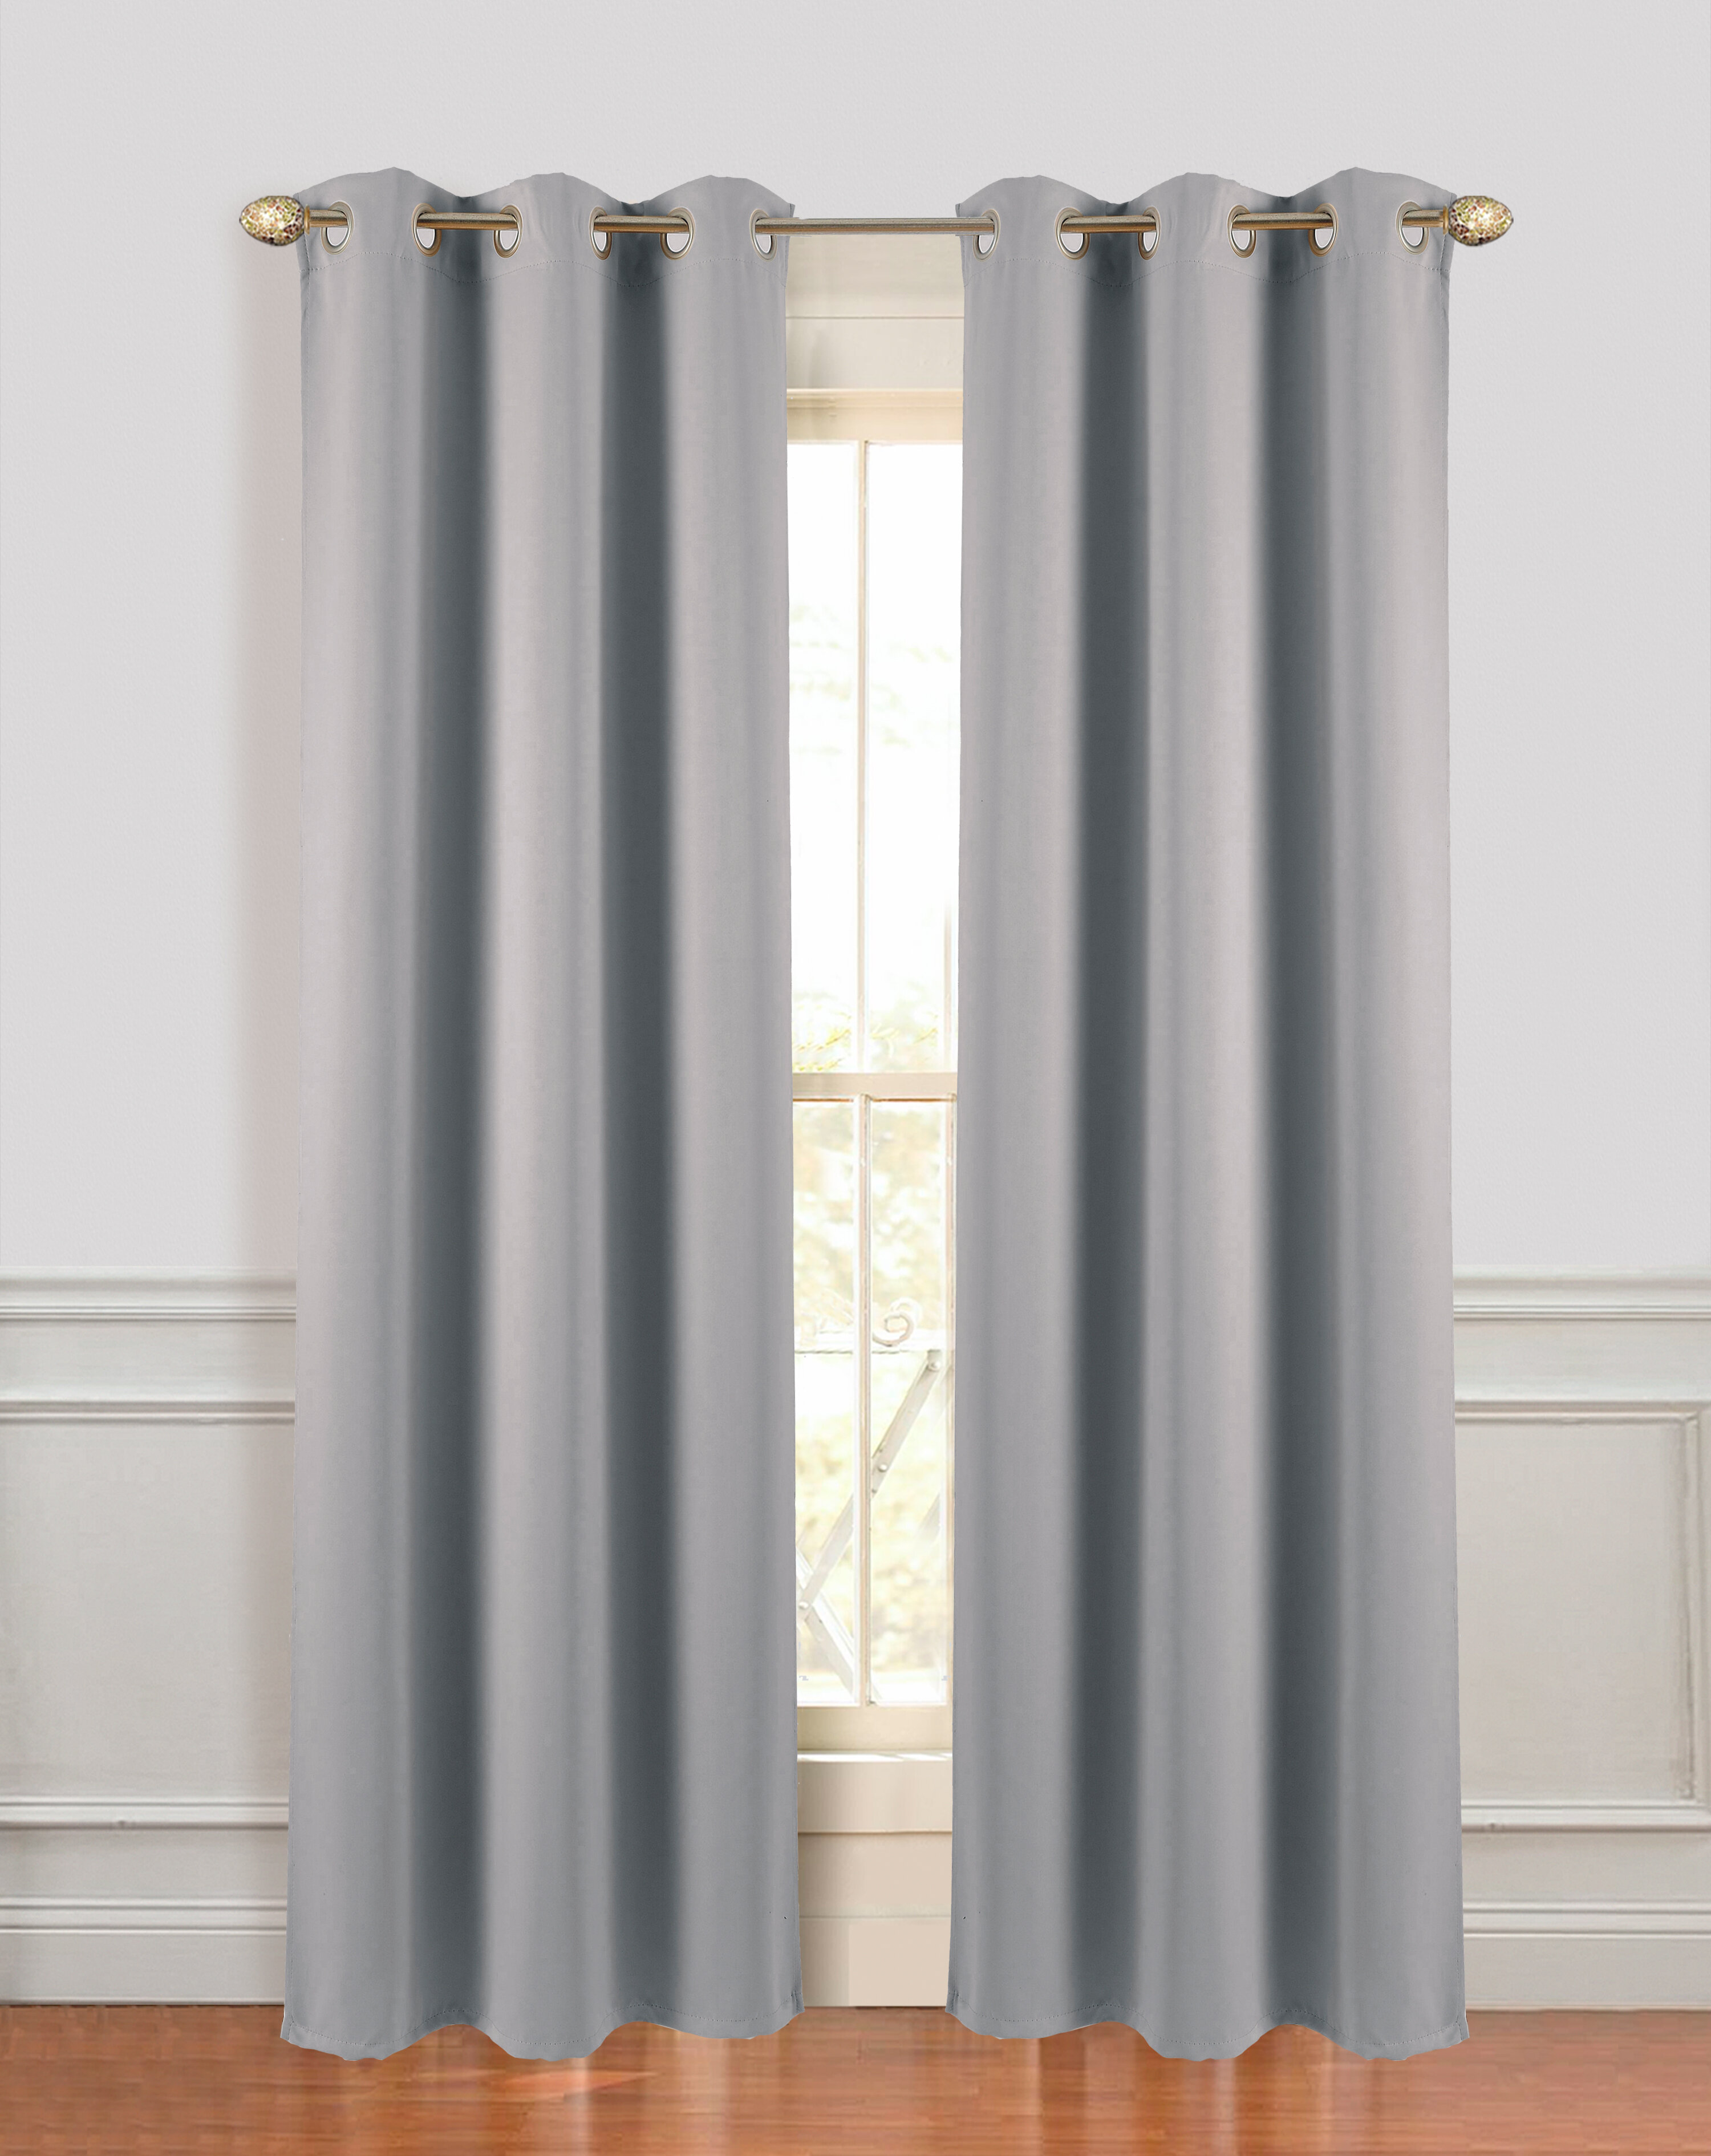 grand hotel extra wide solid blackout grommet curtain panels